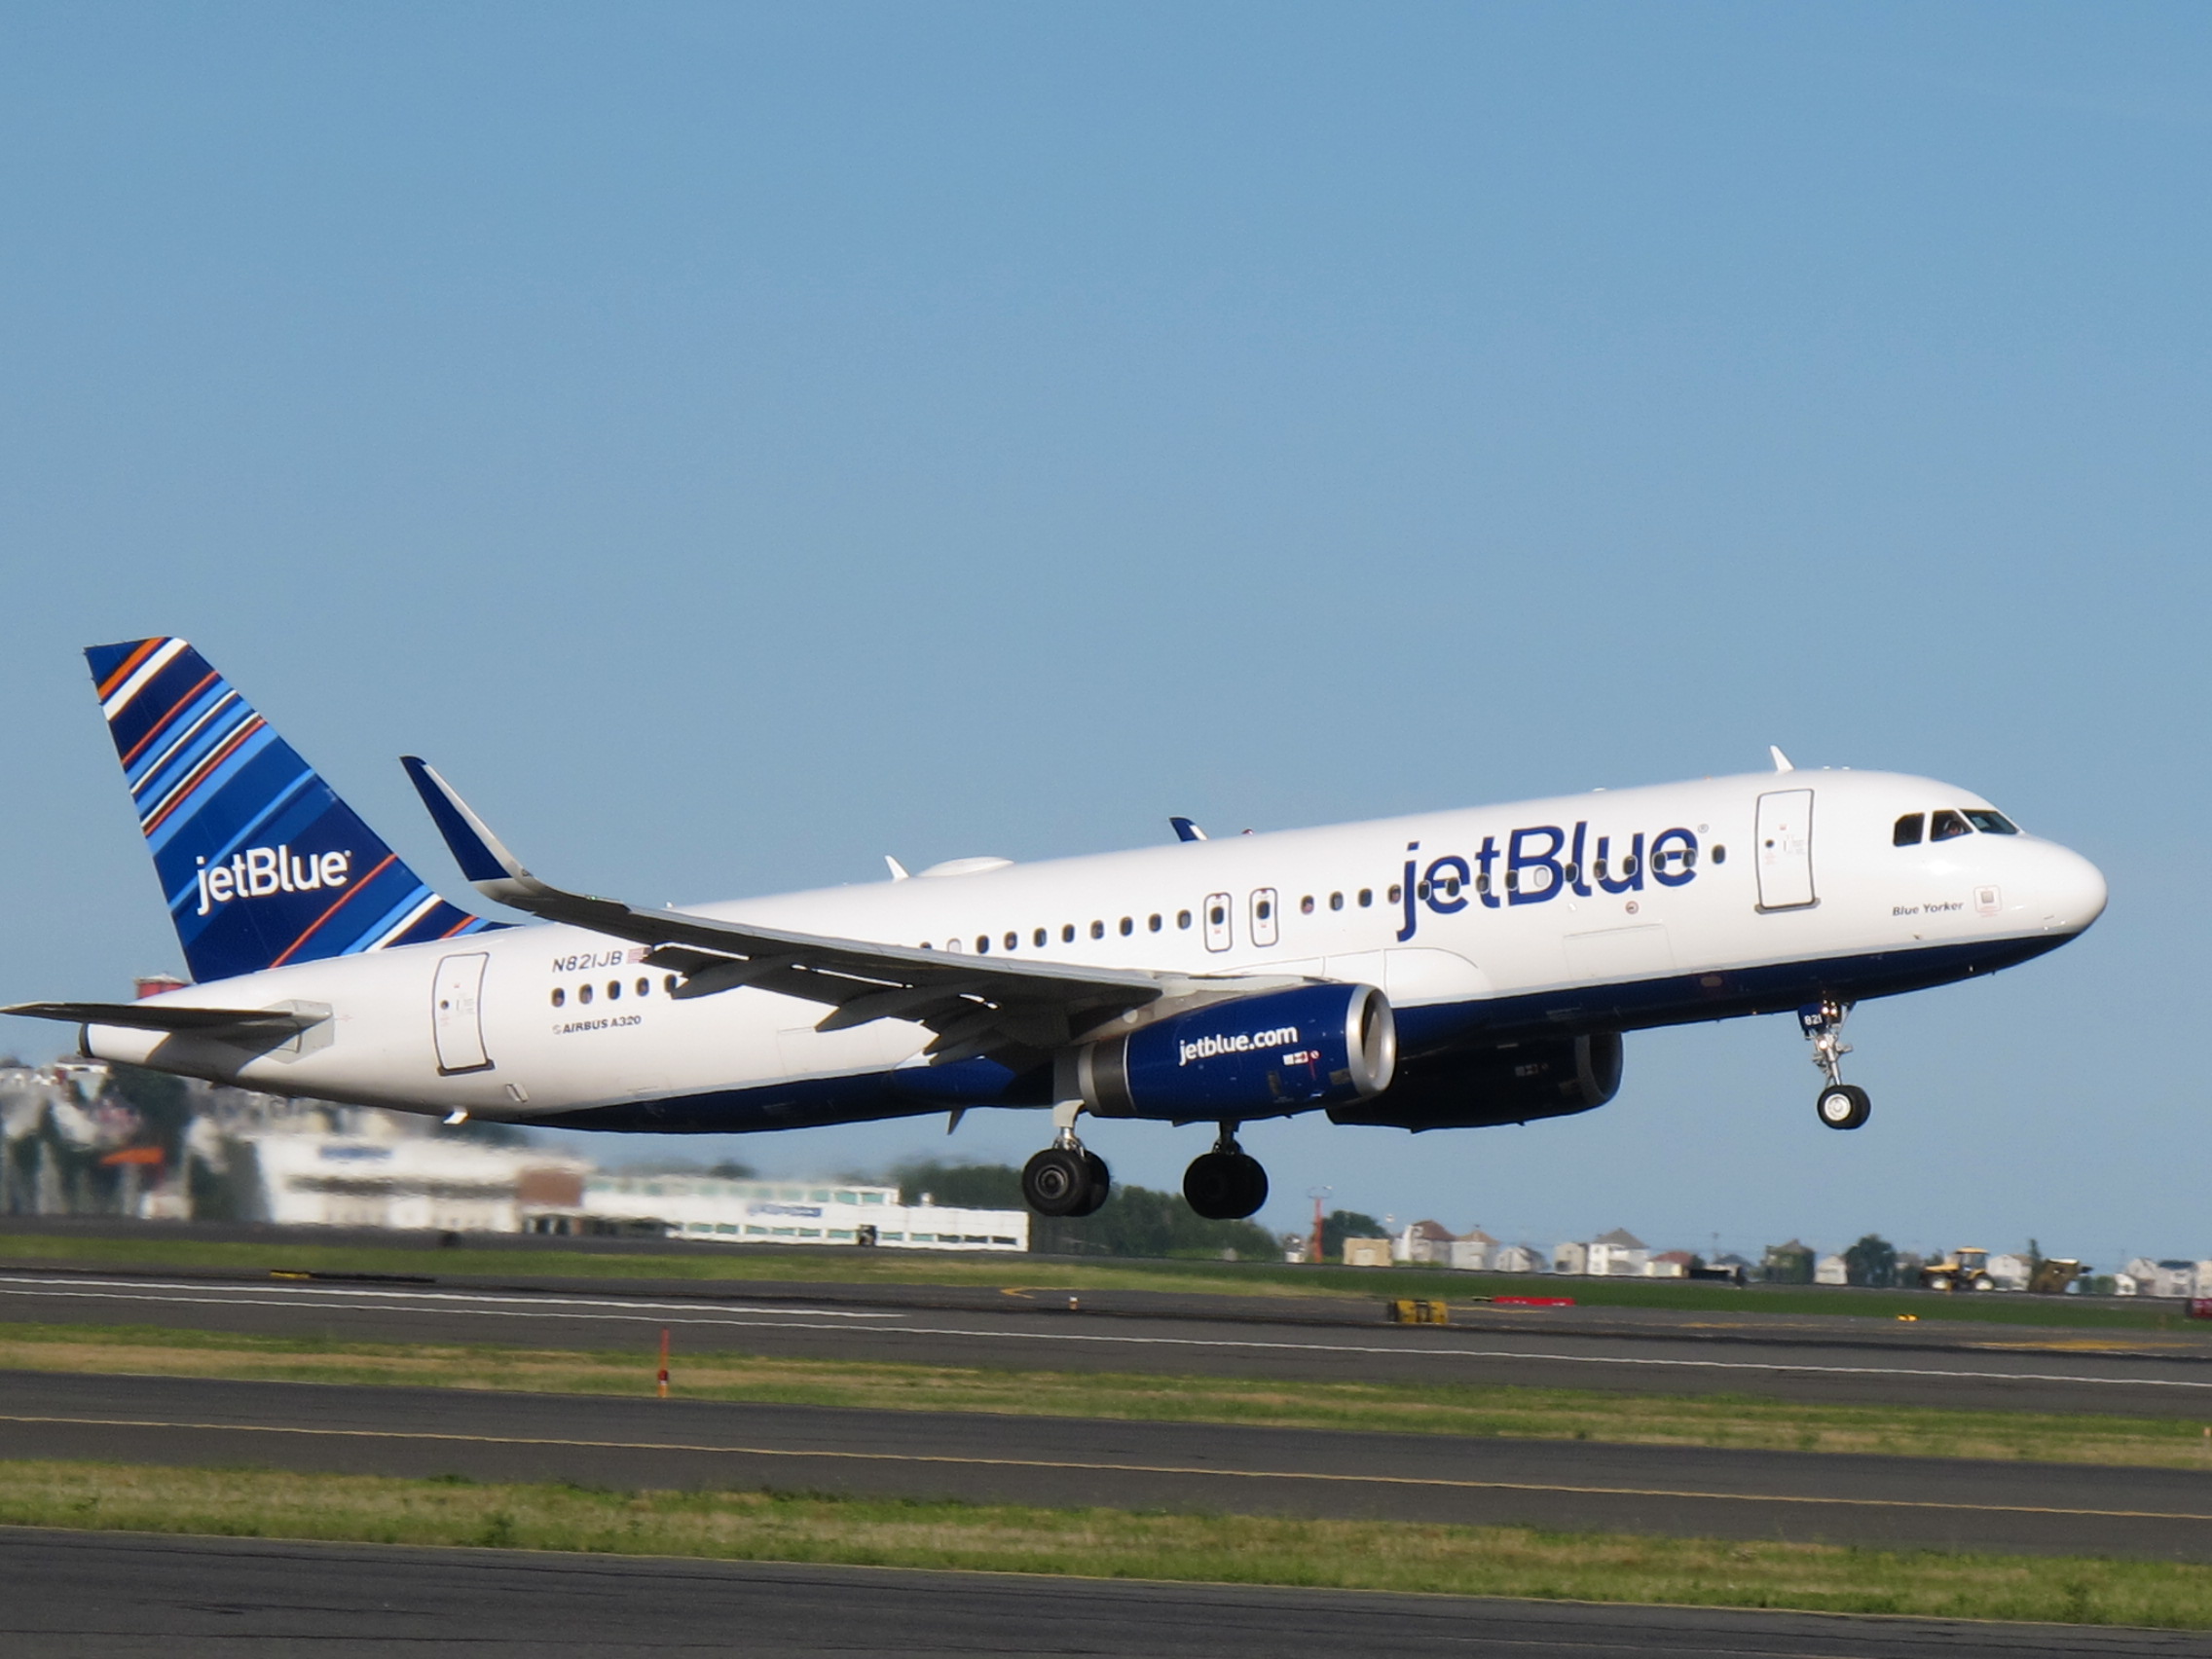 NY To Paris: JetBlue Launched Its First Flight To CDG Airport Last Week